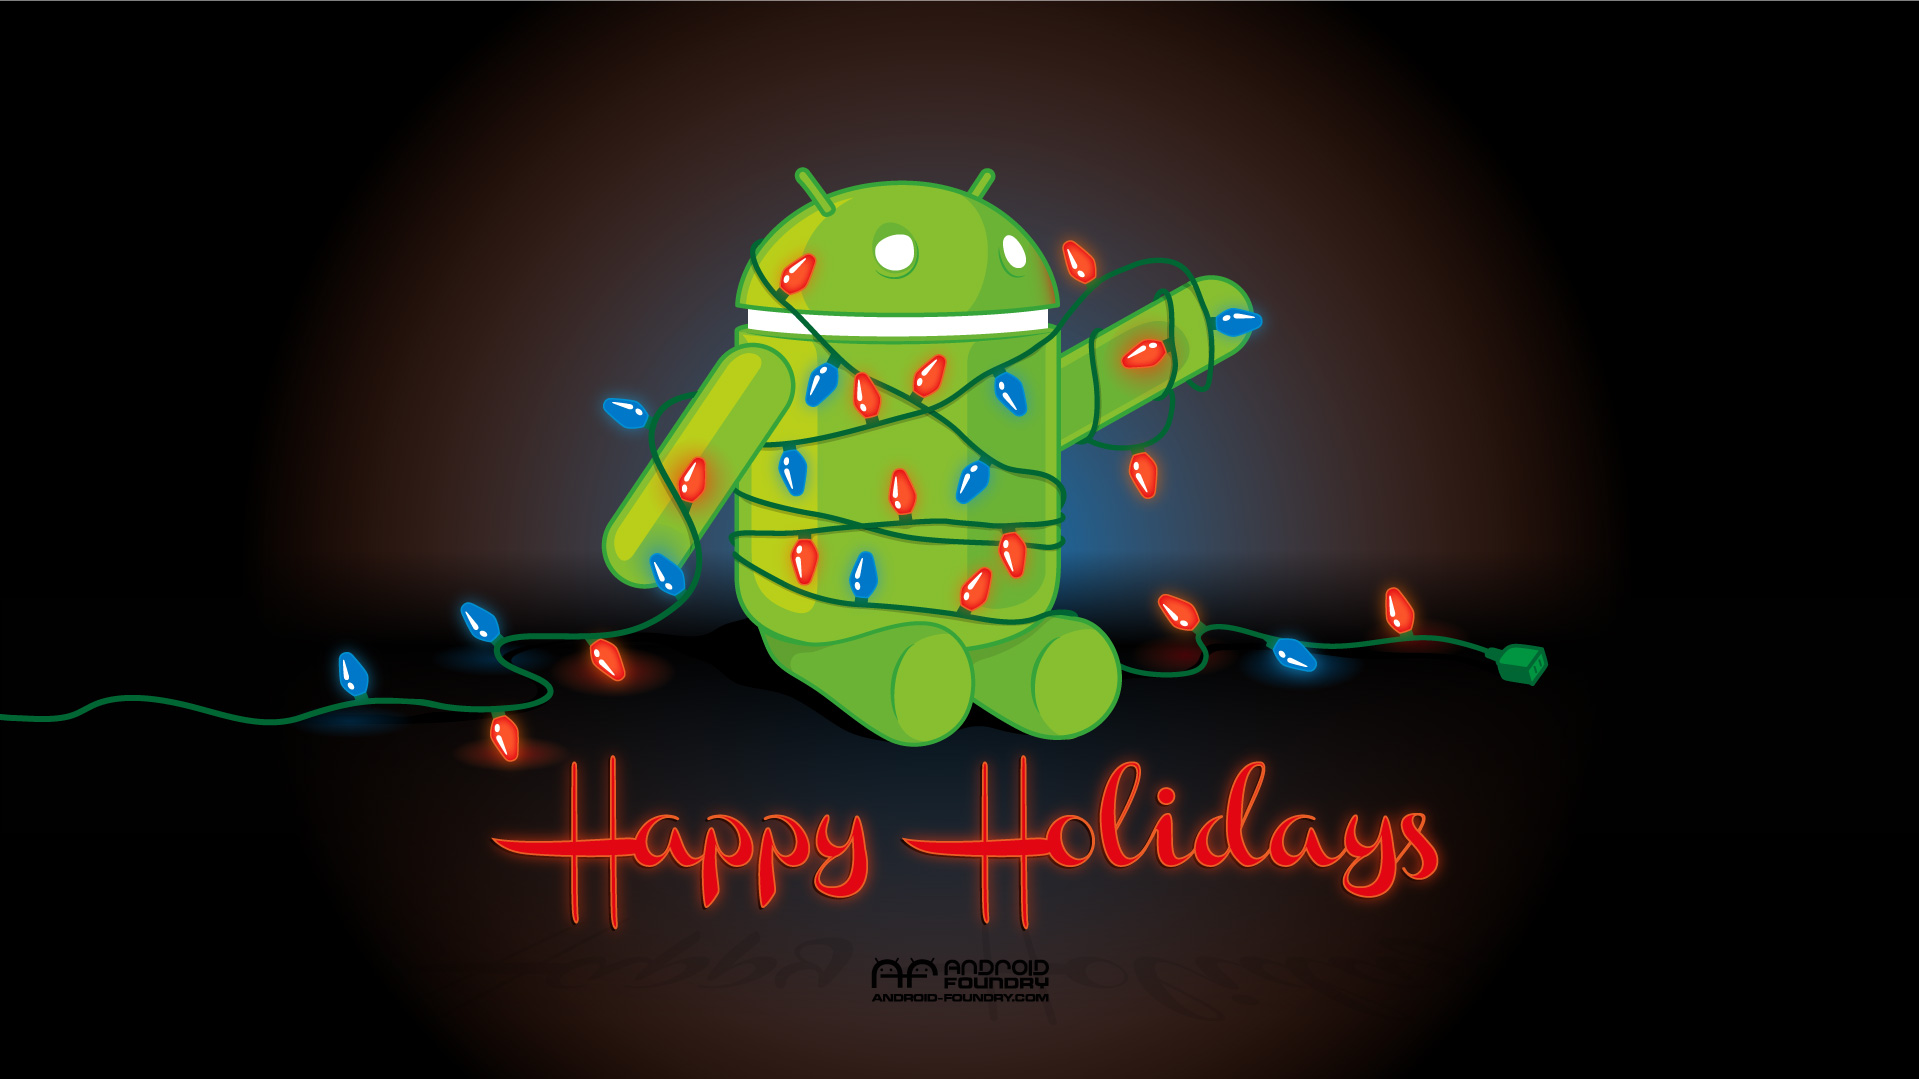 122012 Holiday2012a - Android Happy Holidays , HD Wallpaper & Backgrounds